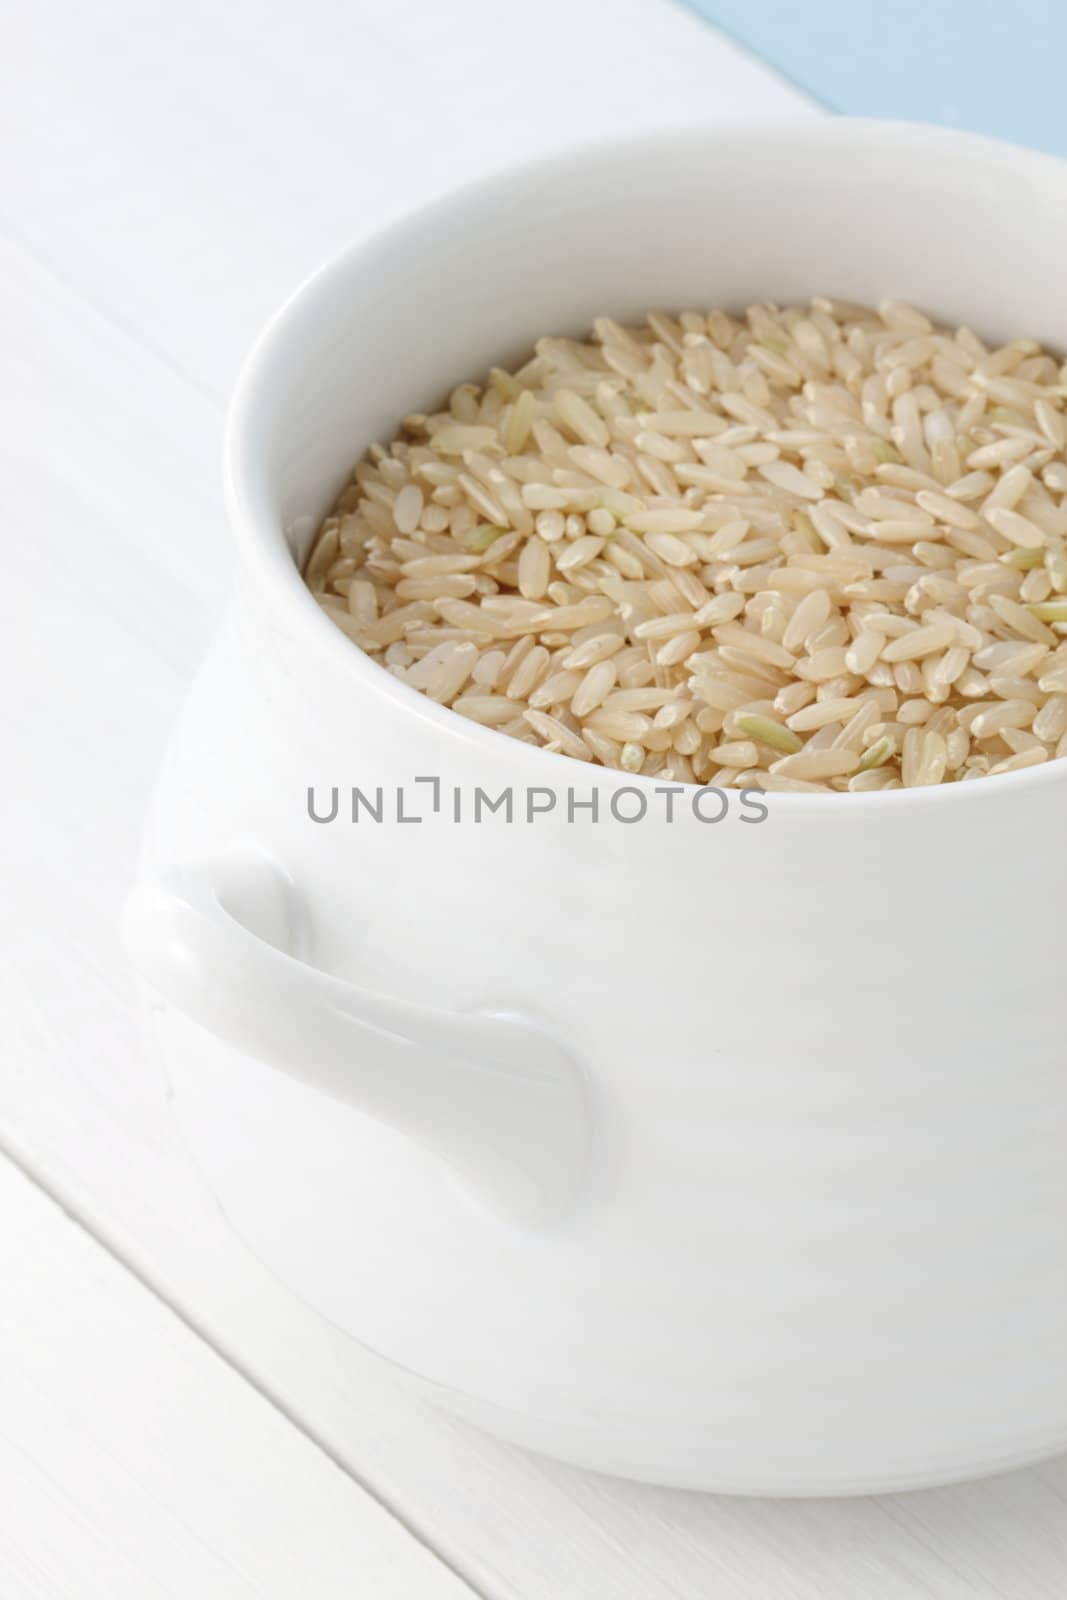 Nutritious Brown rice, whole grain, that delivers fiber and protein, is low in Saturated Fat, and very low in Cholesterol and Sodium.